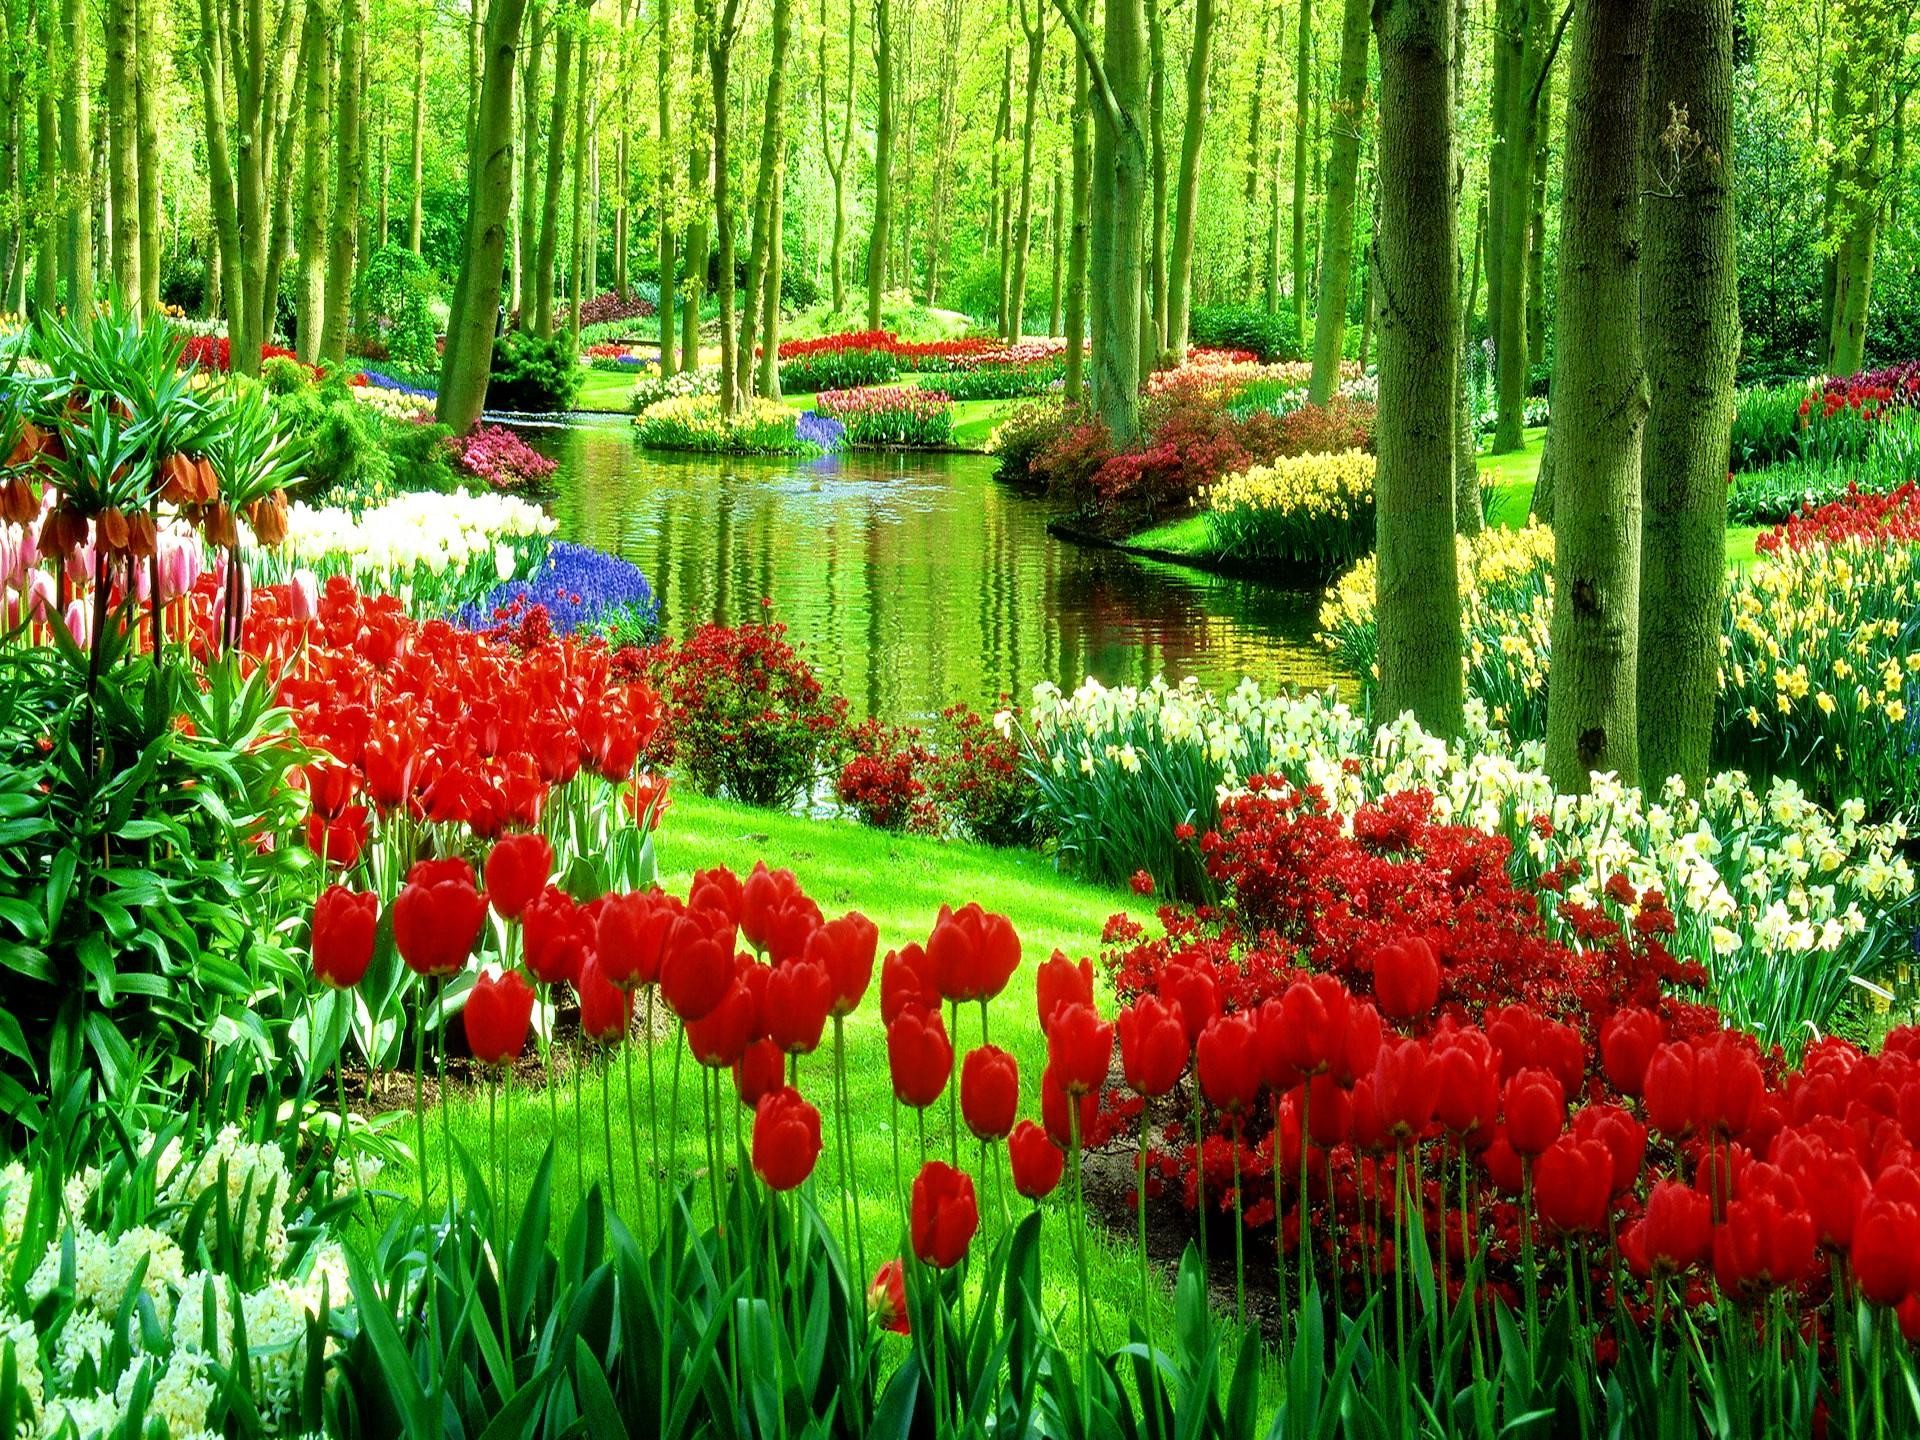 1920x1440 Green Park With Flowers Nature Full HD Wallpaper